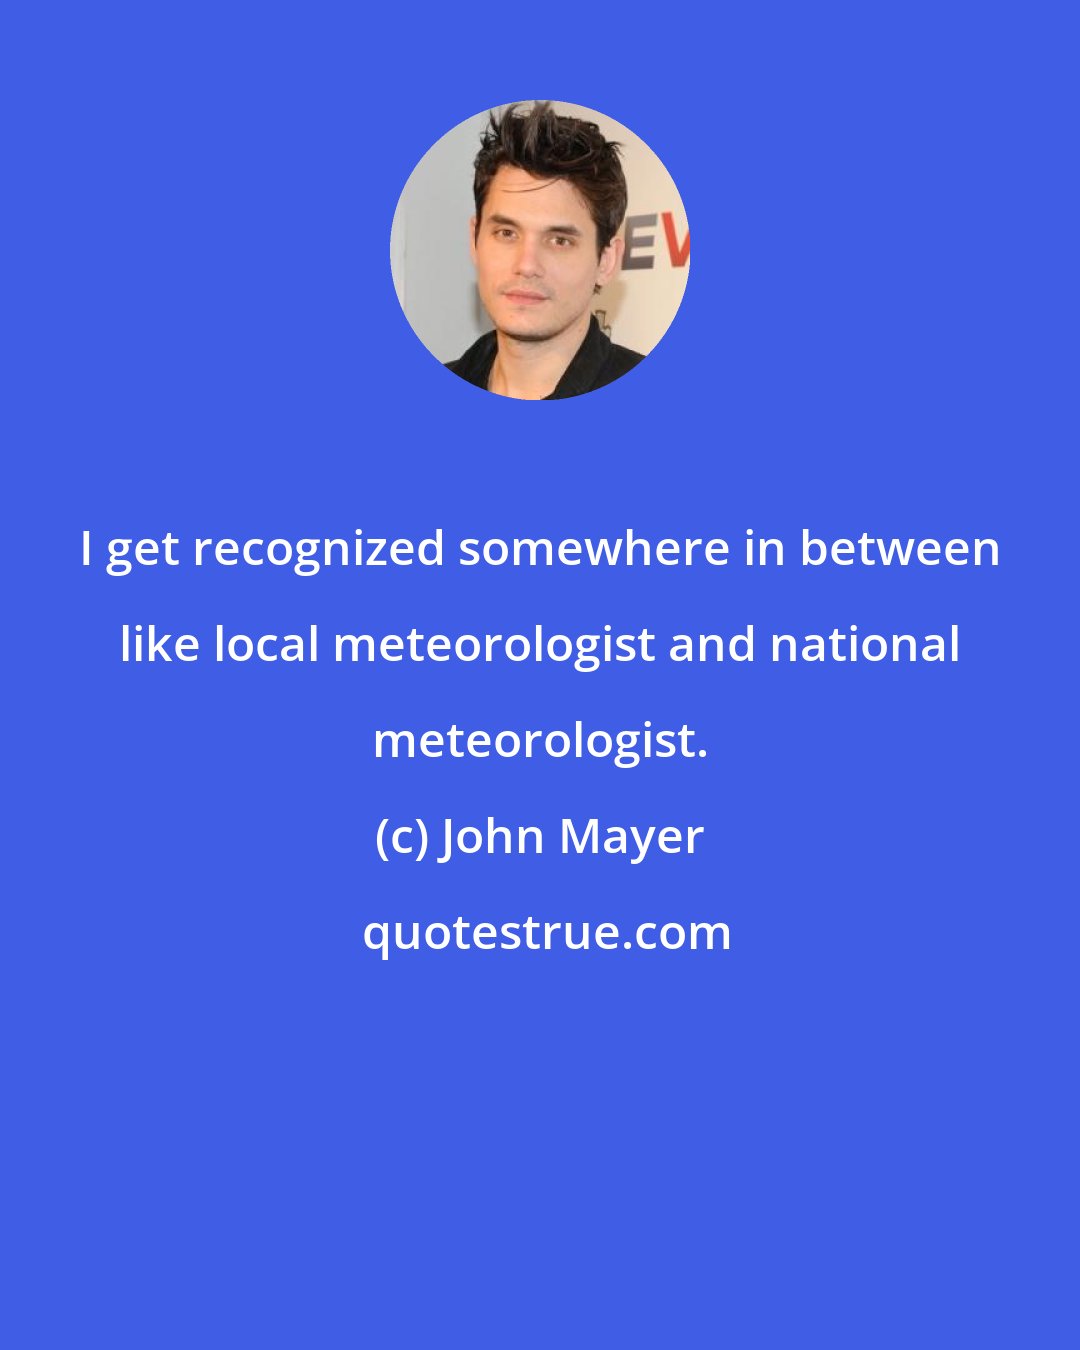 John Mayer: I get recognized somewhere in between like local meteorologist and national meteorologist.